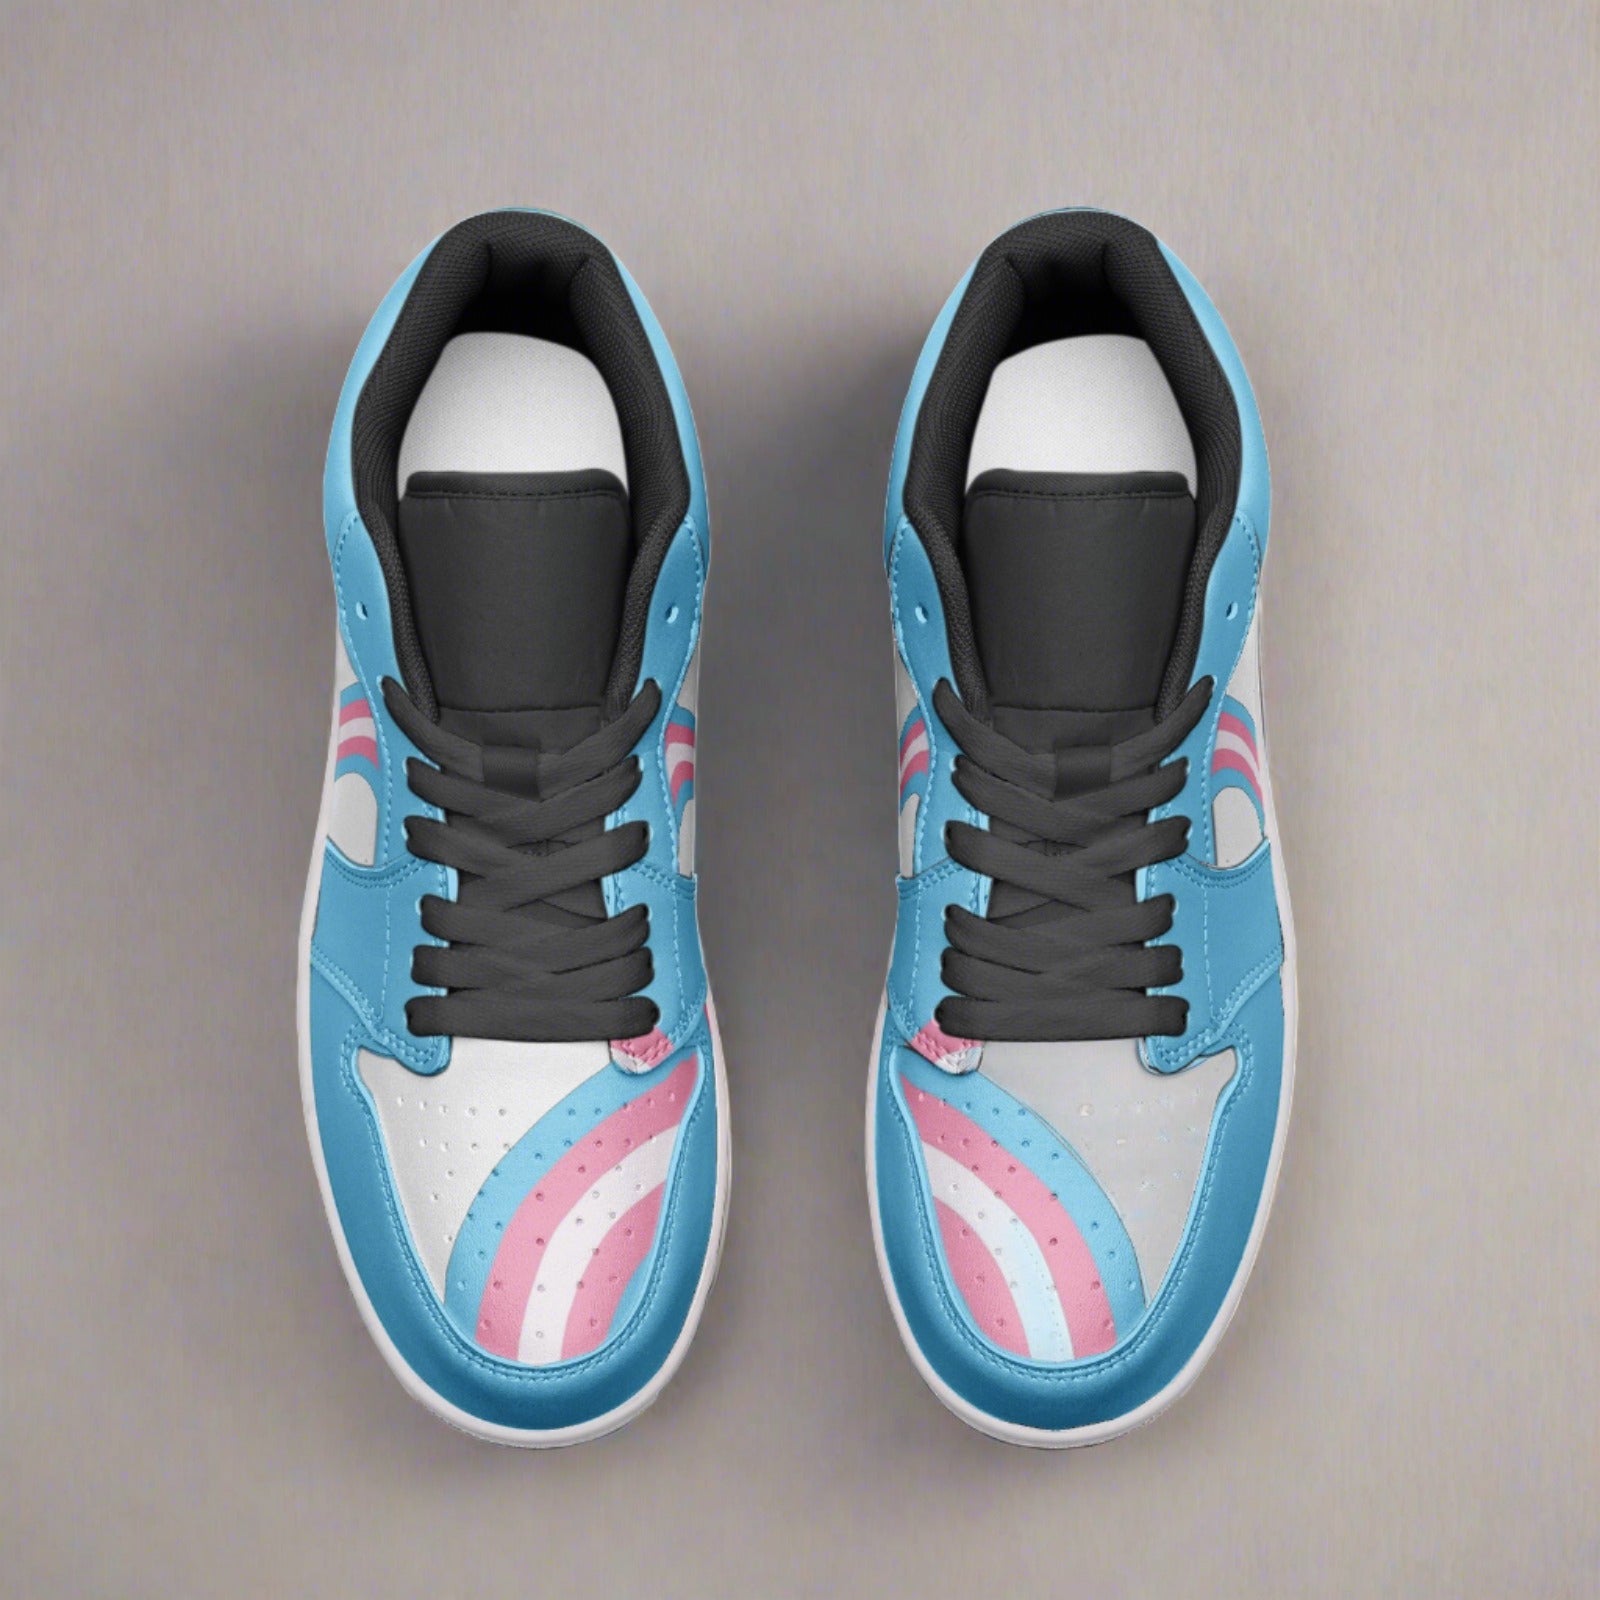 Transgender Pride Low Top Leather Sneakers - Rose Gold Co. Shop